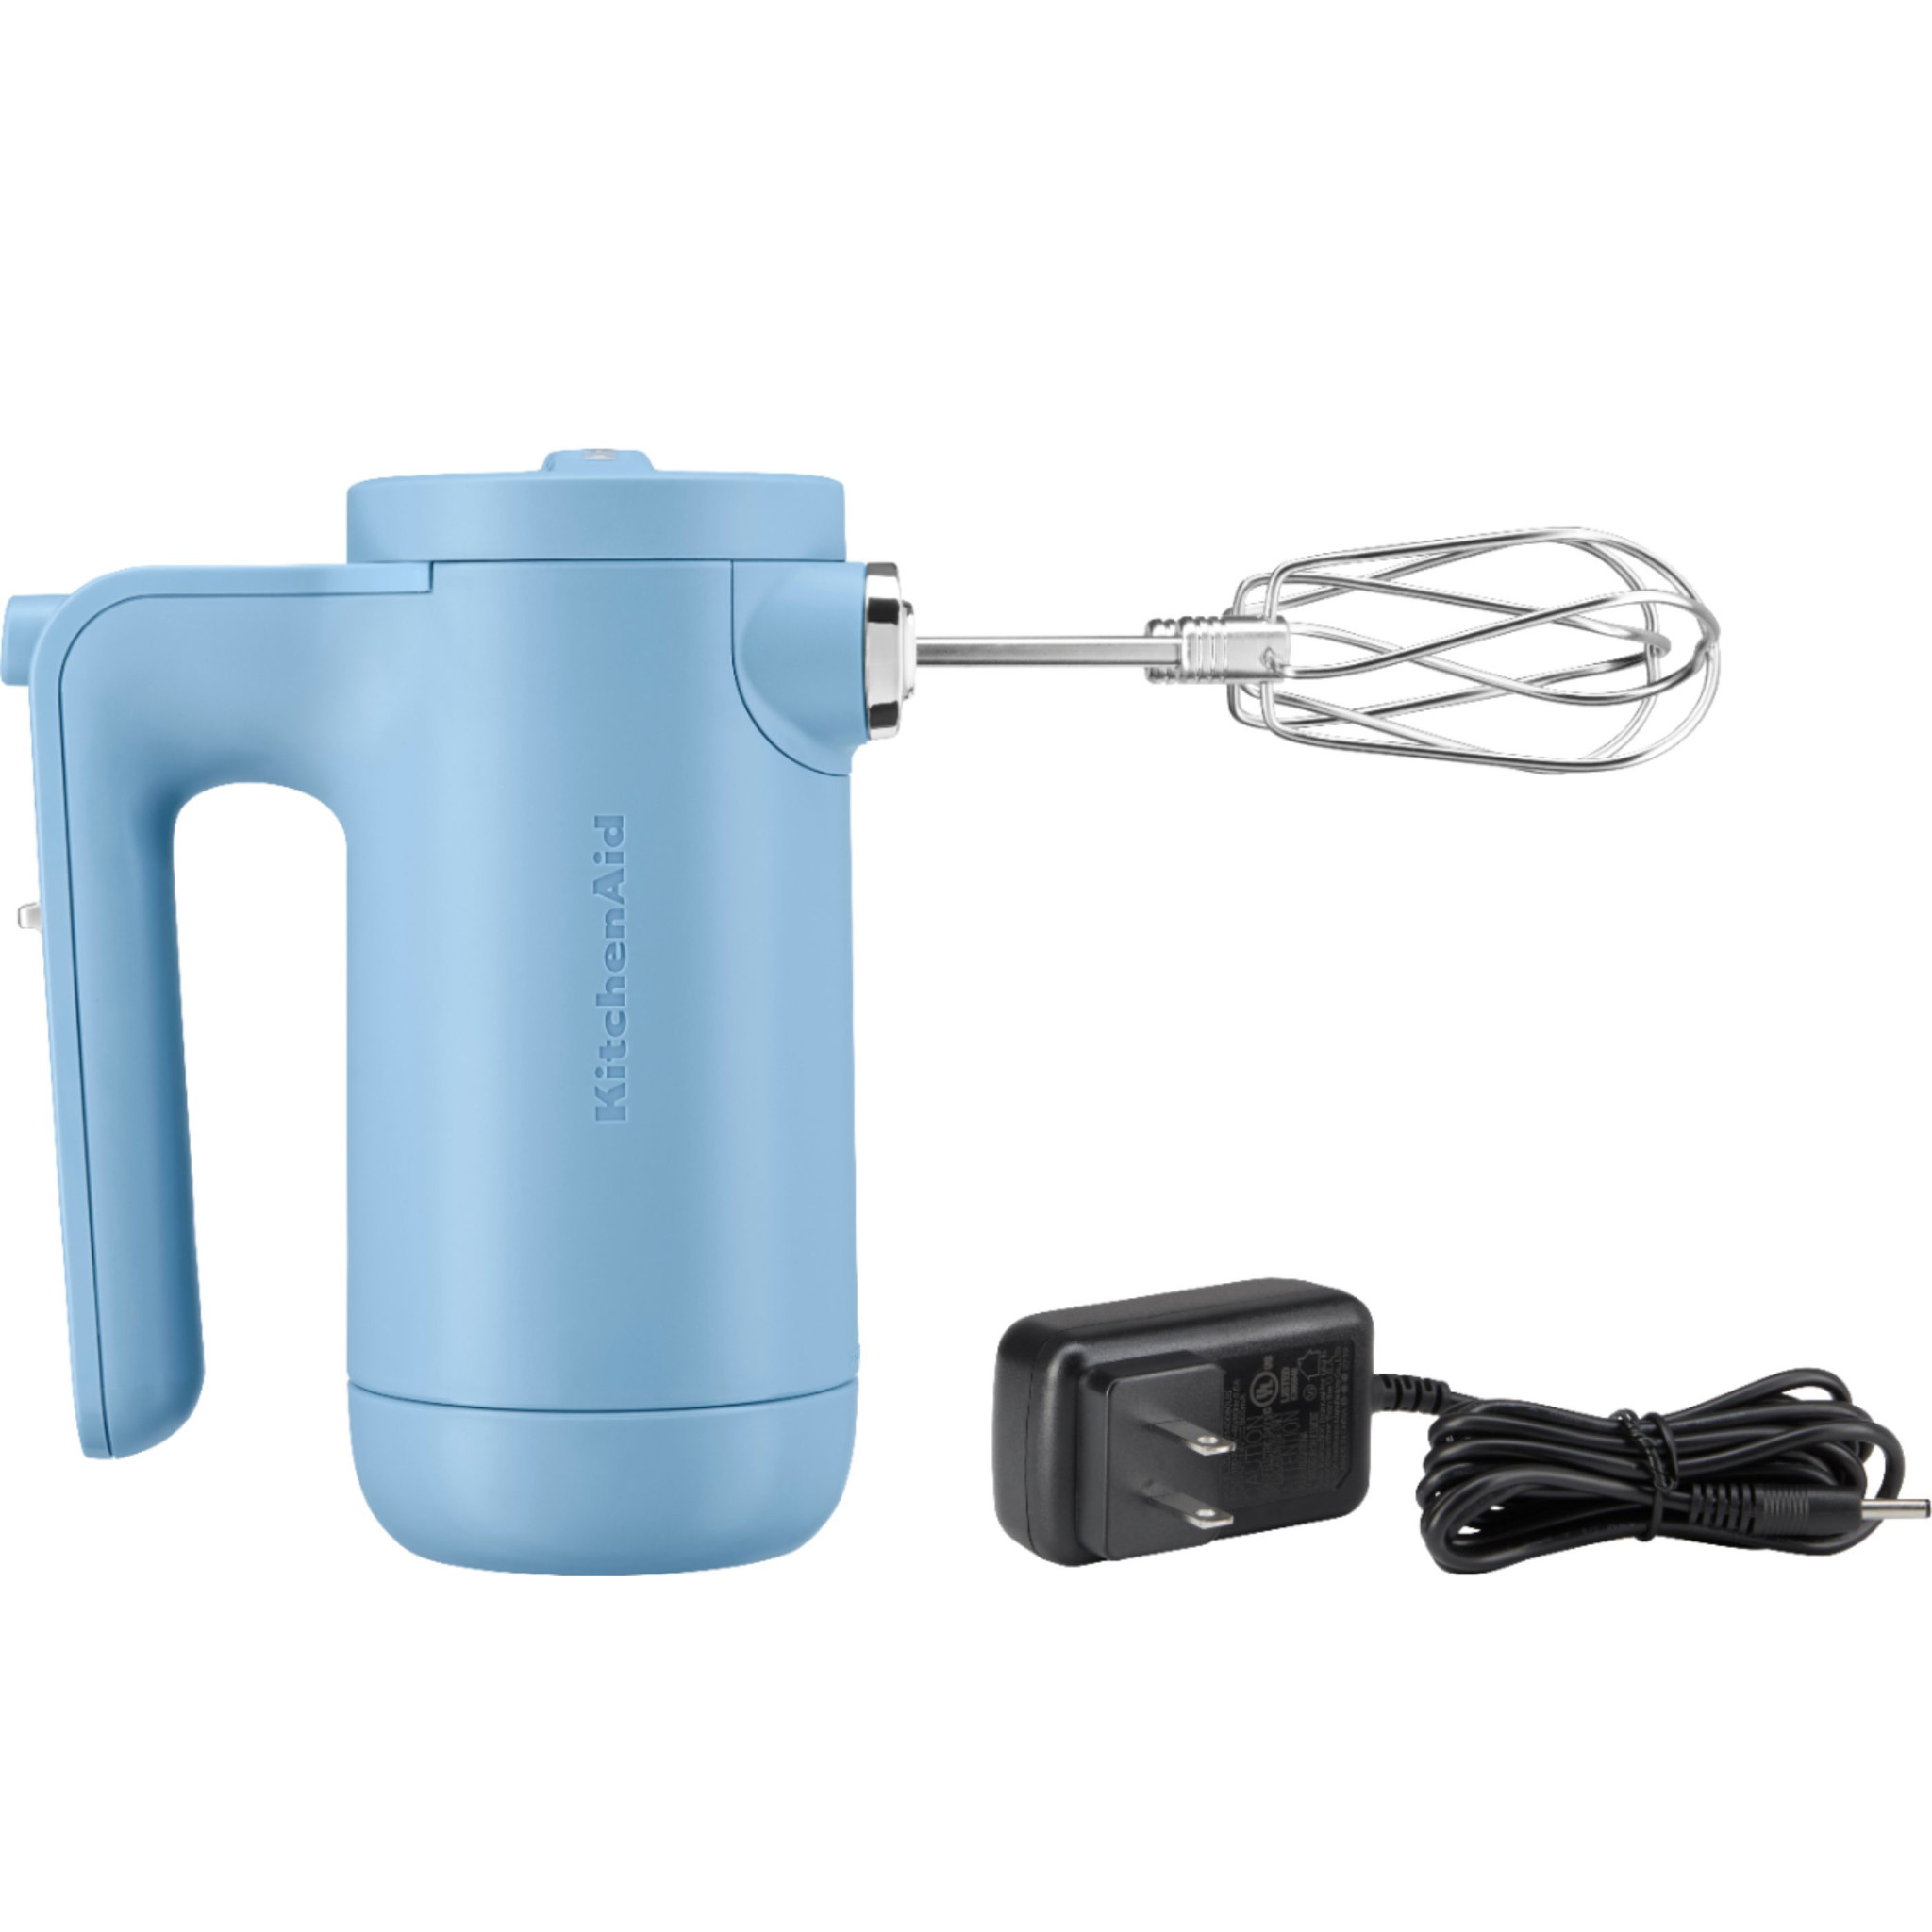 Wireless hand mixer with whisks, battery operated 